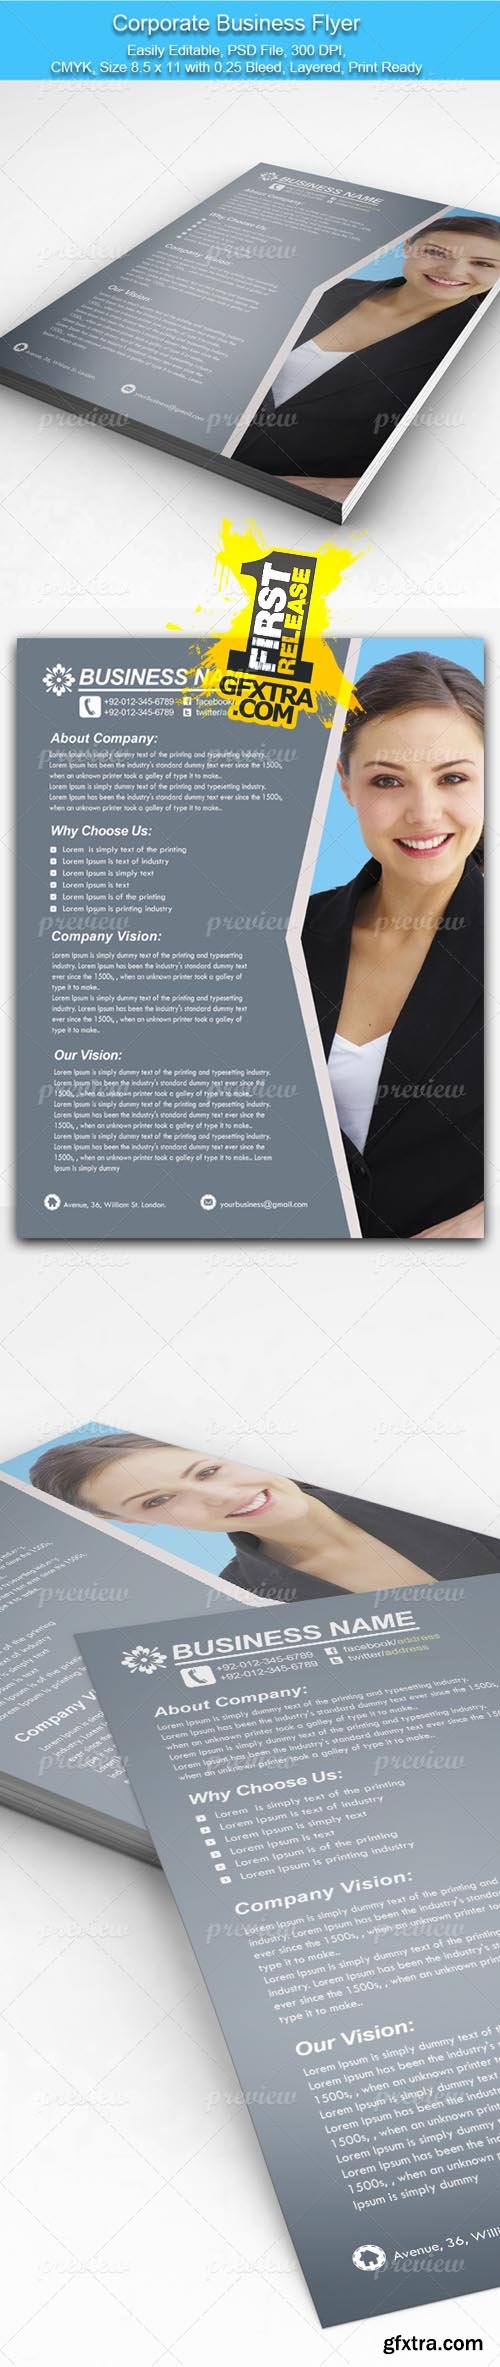 Corporate Business Flyer 2806